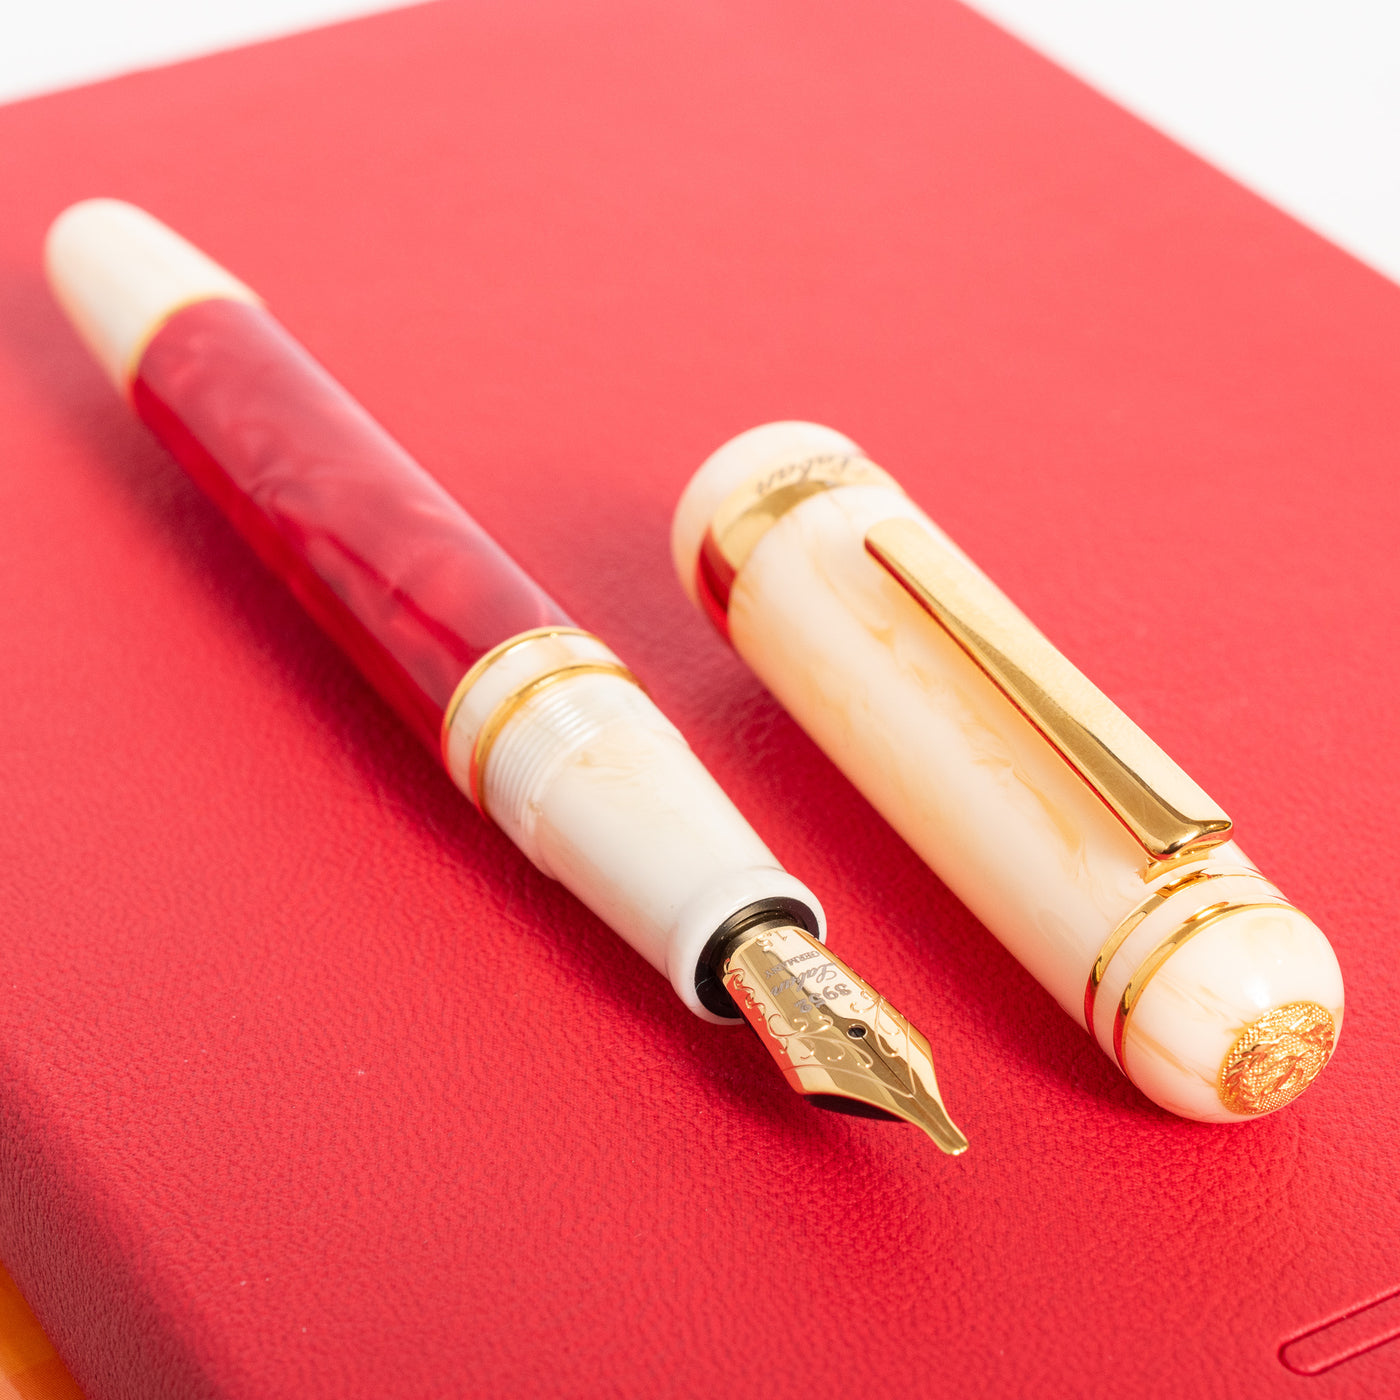 Laban 325 Fountain Pen - Flame gold plated